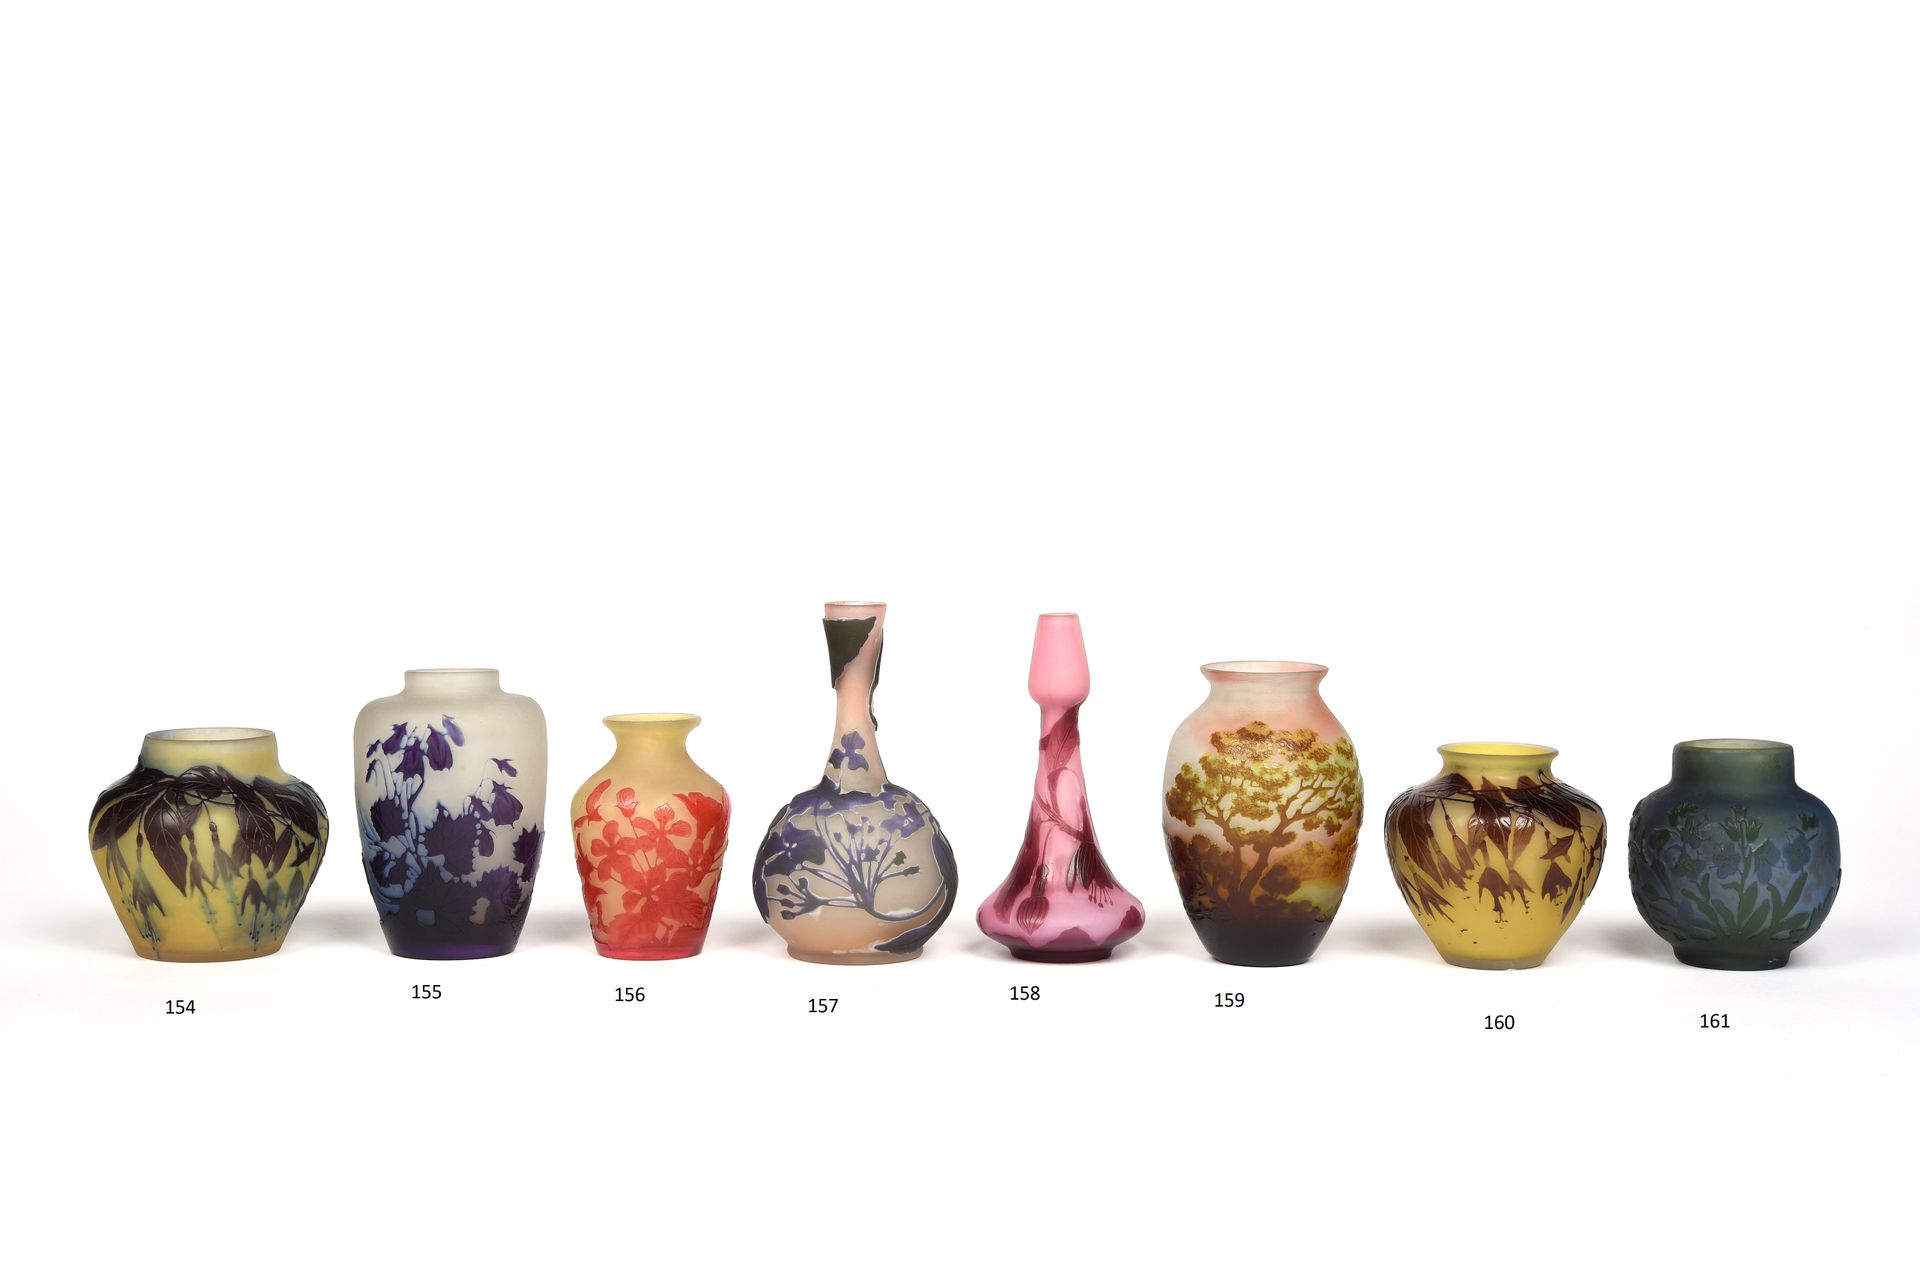 Null ÉMILE GALLÉ (1846-1904)

Vase soliflore out of multi-layered glass taken wi&hellip;